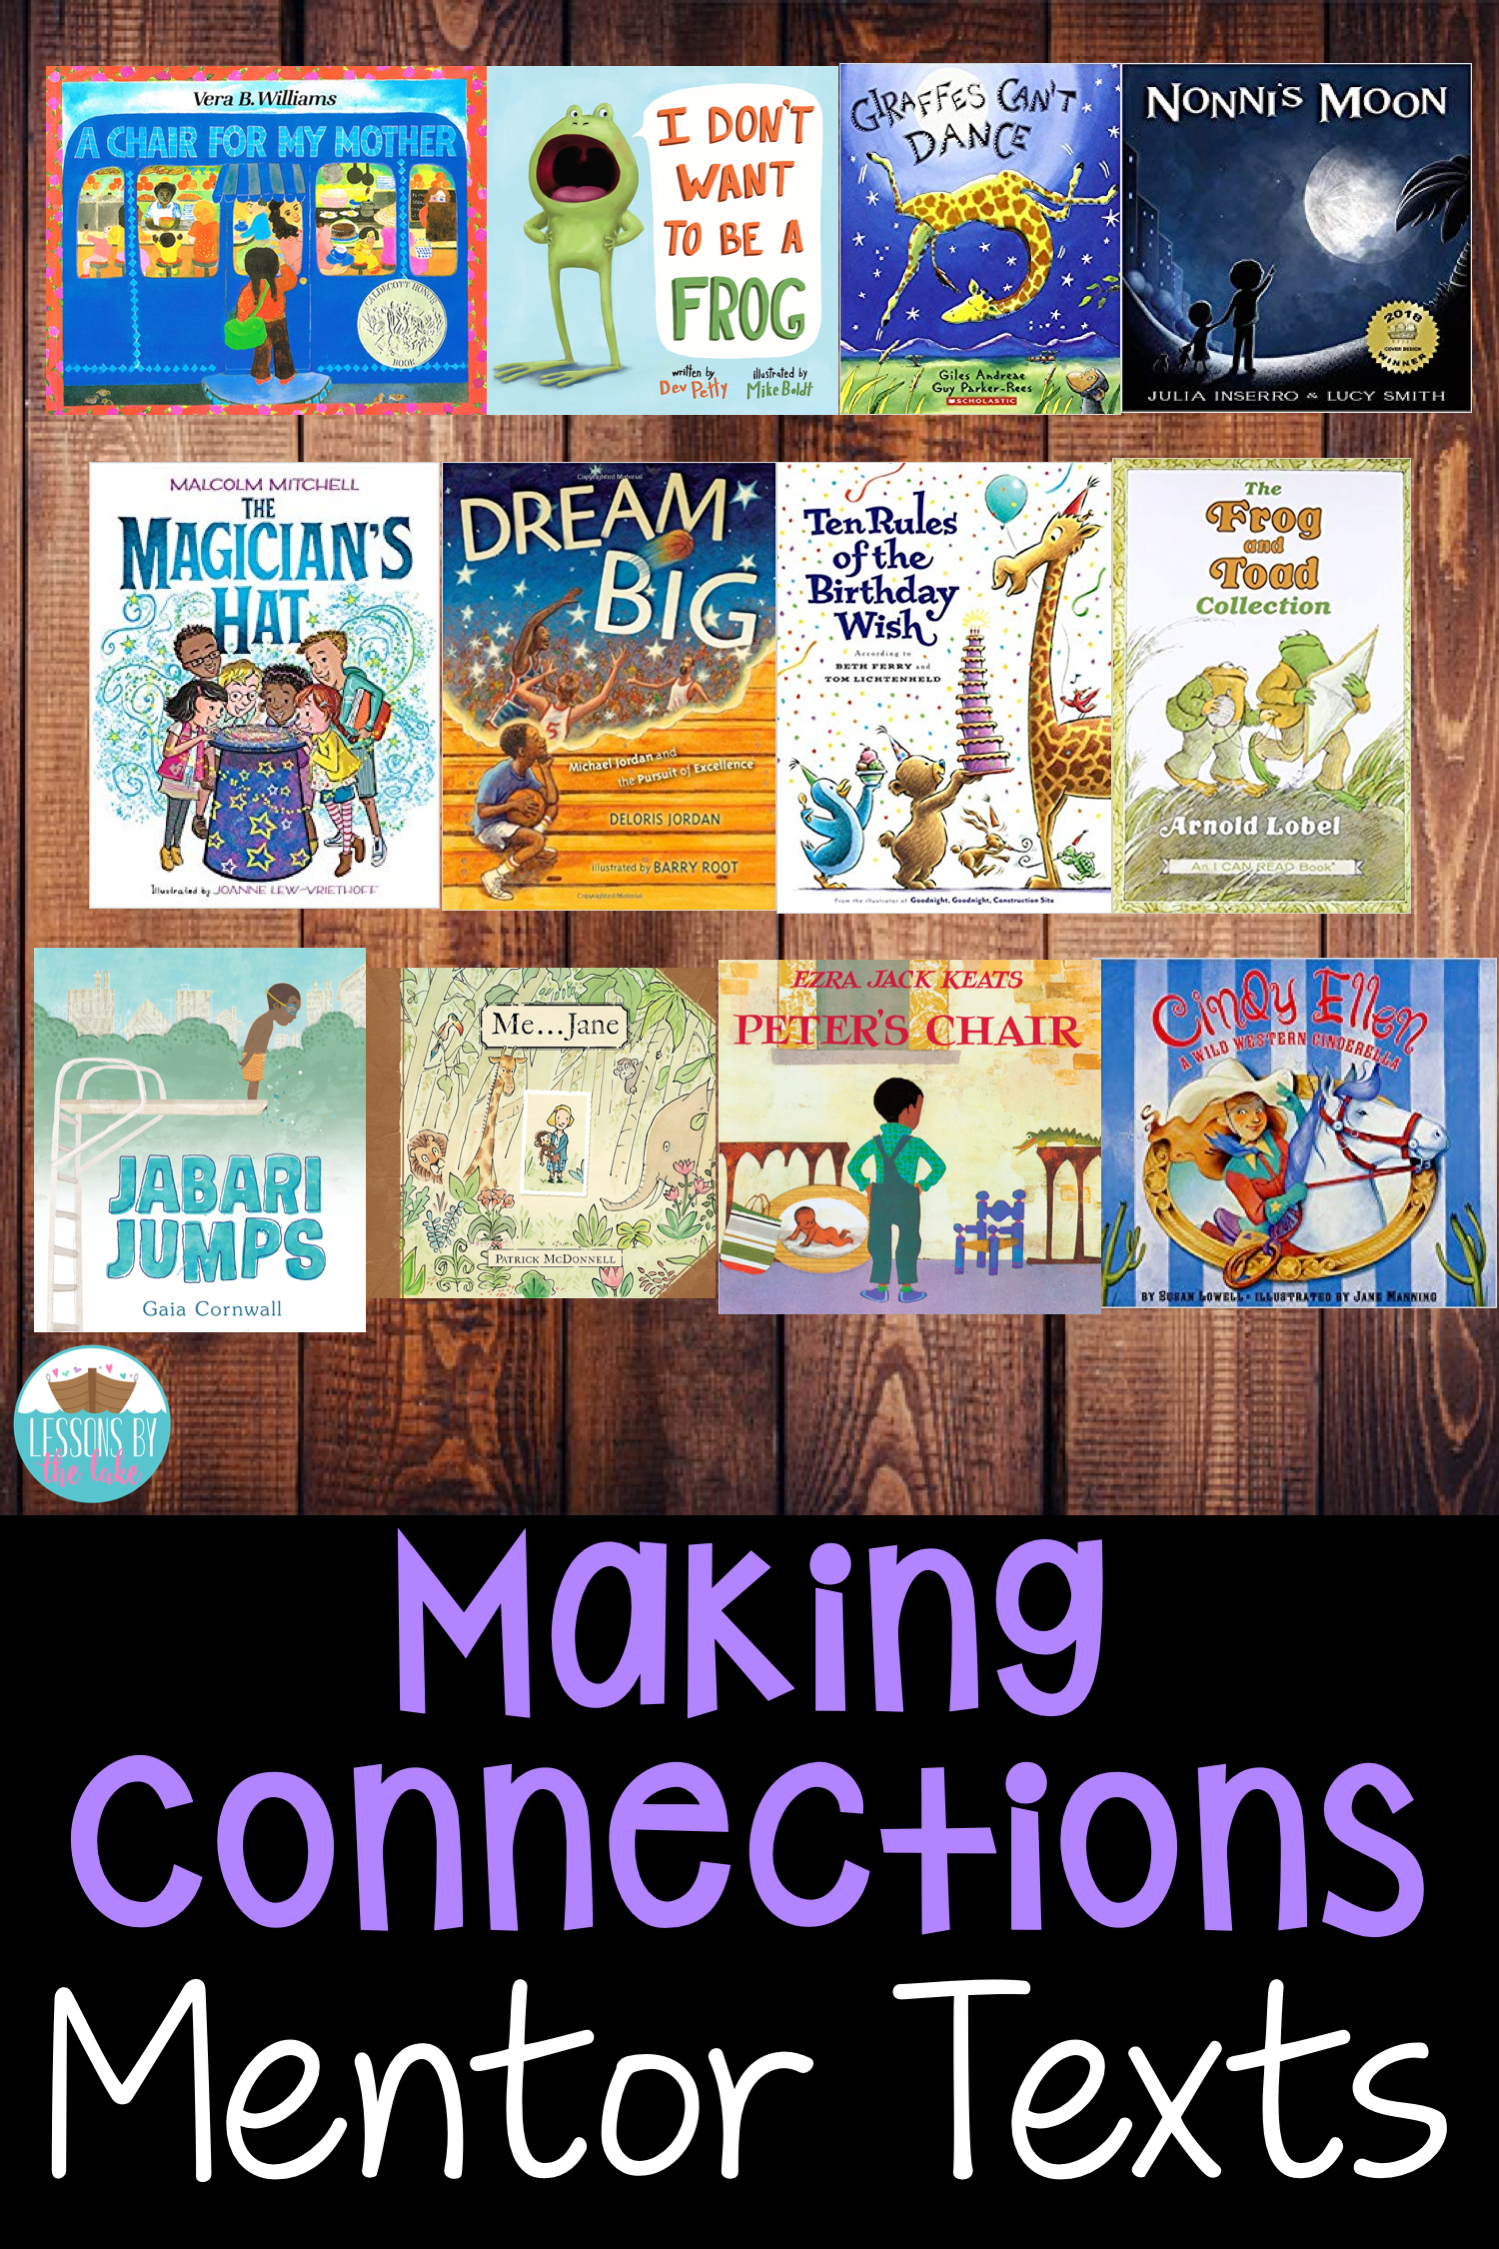 picture books, mentor texts, making connections, teaching connections